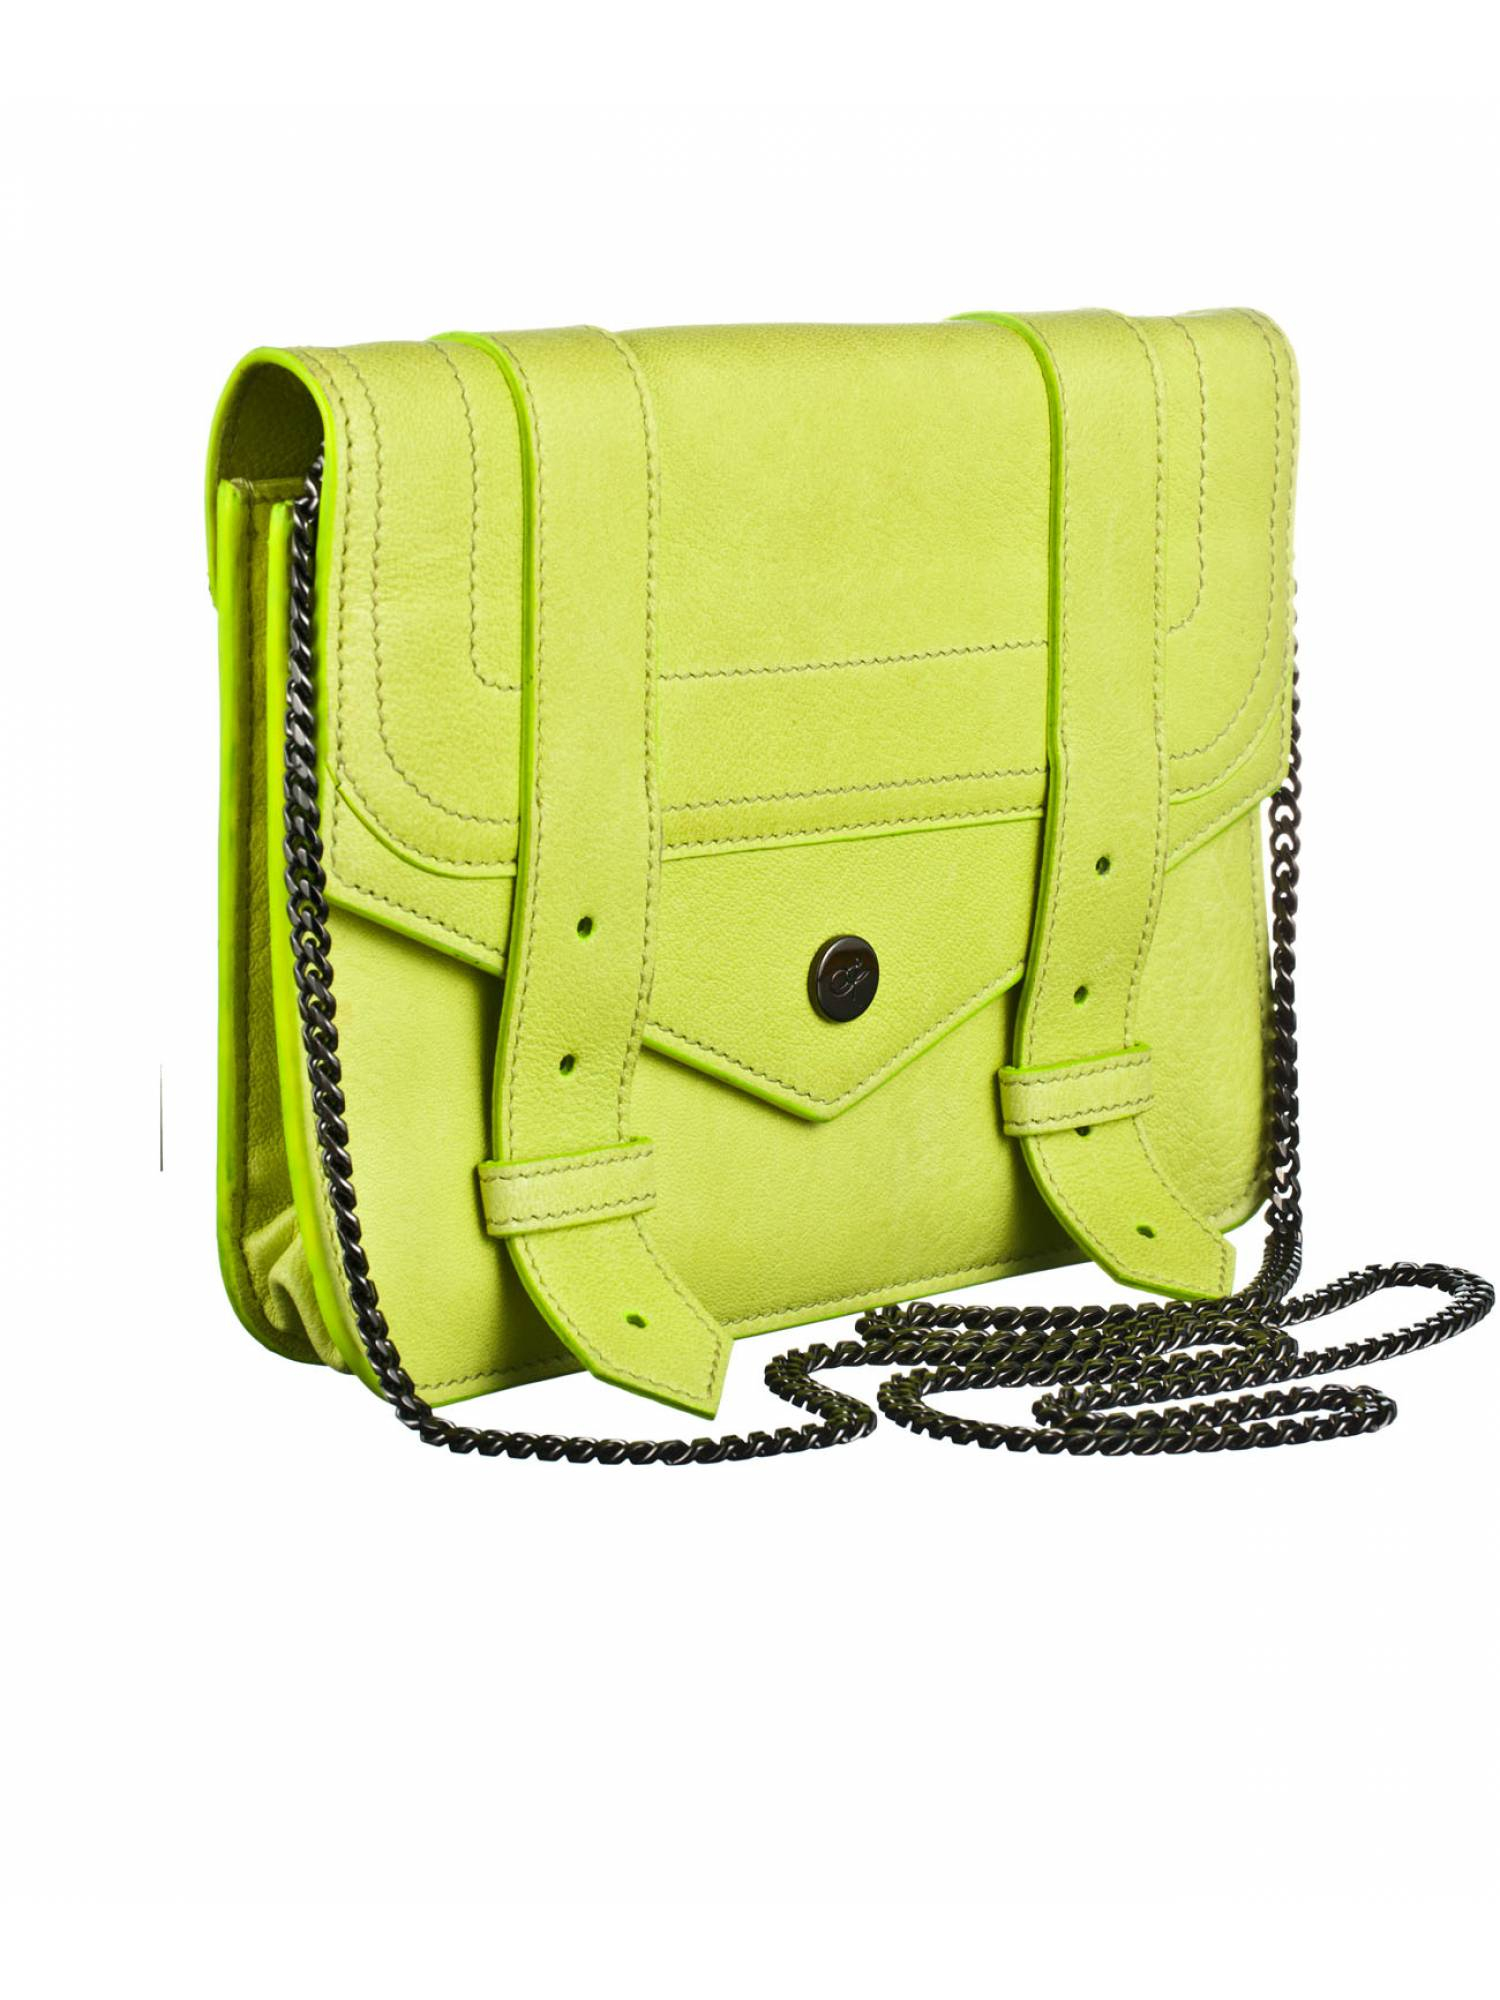 Proenza Schouler Ps1 Large Chain Wallet Leather In Lemon à Ps1 Large Chain Wallet